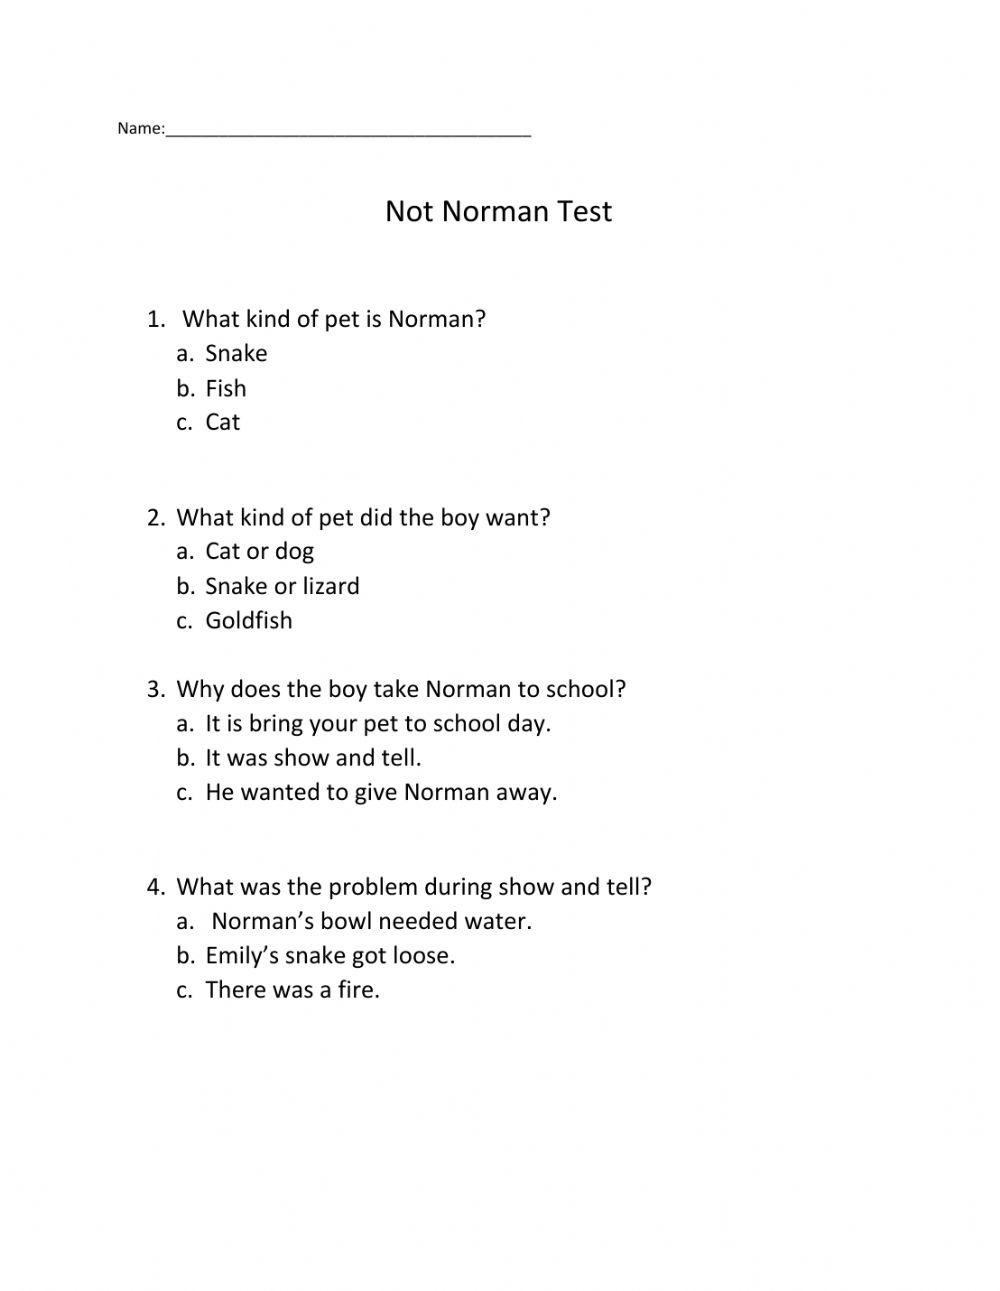 Not Norman Test